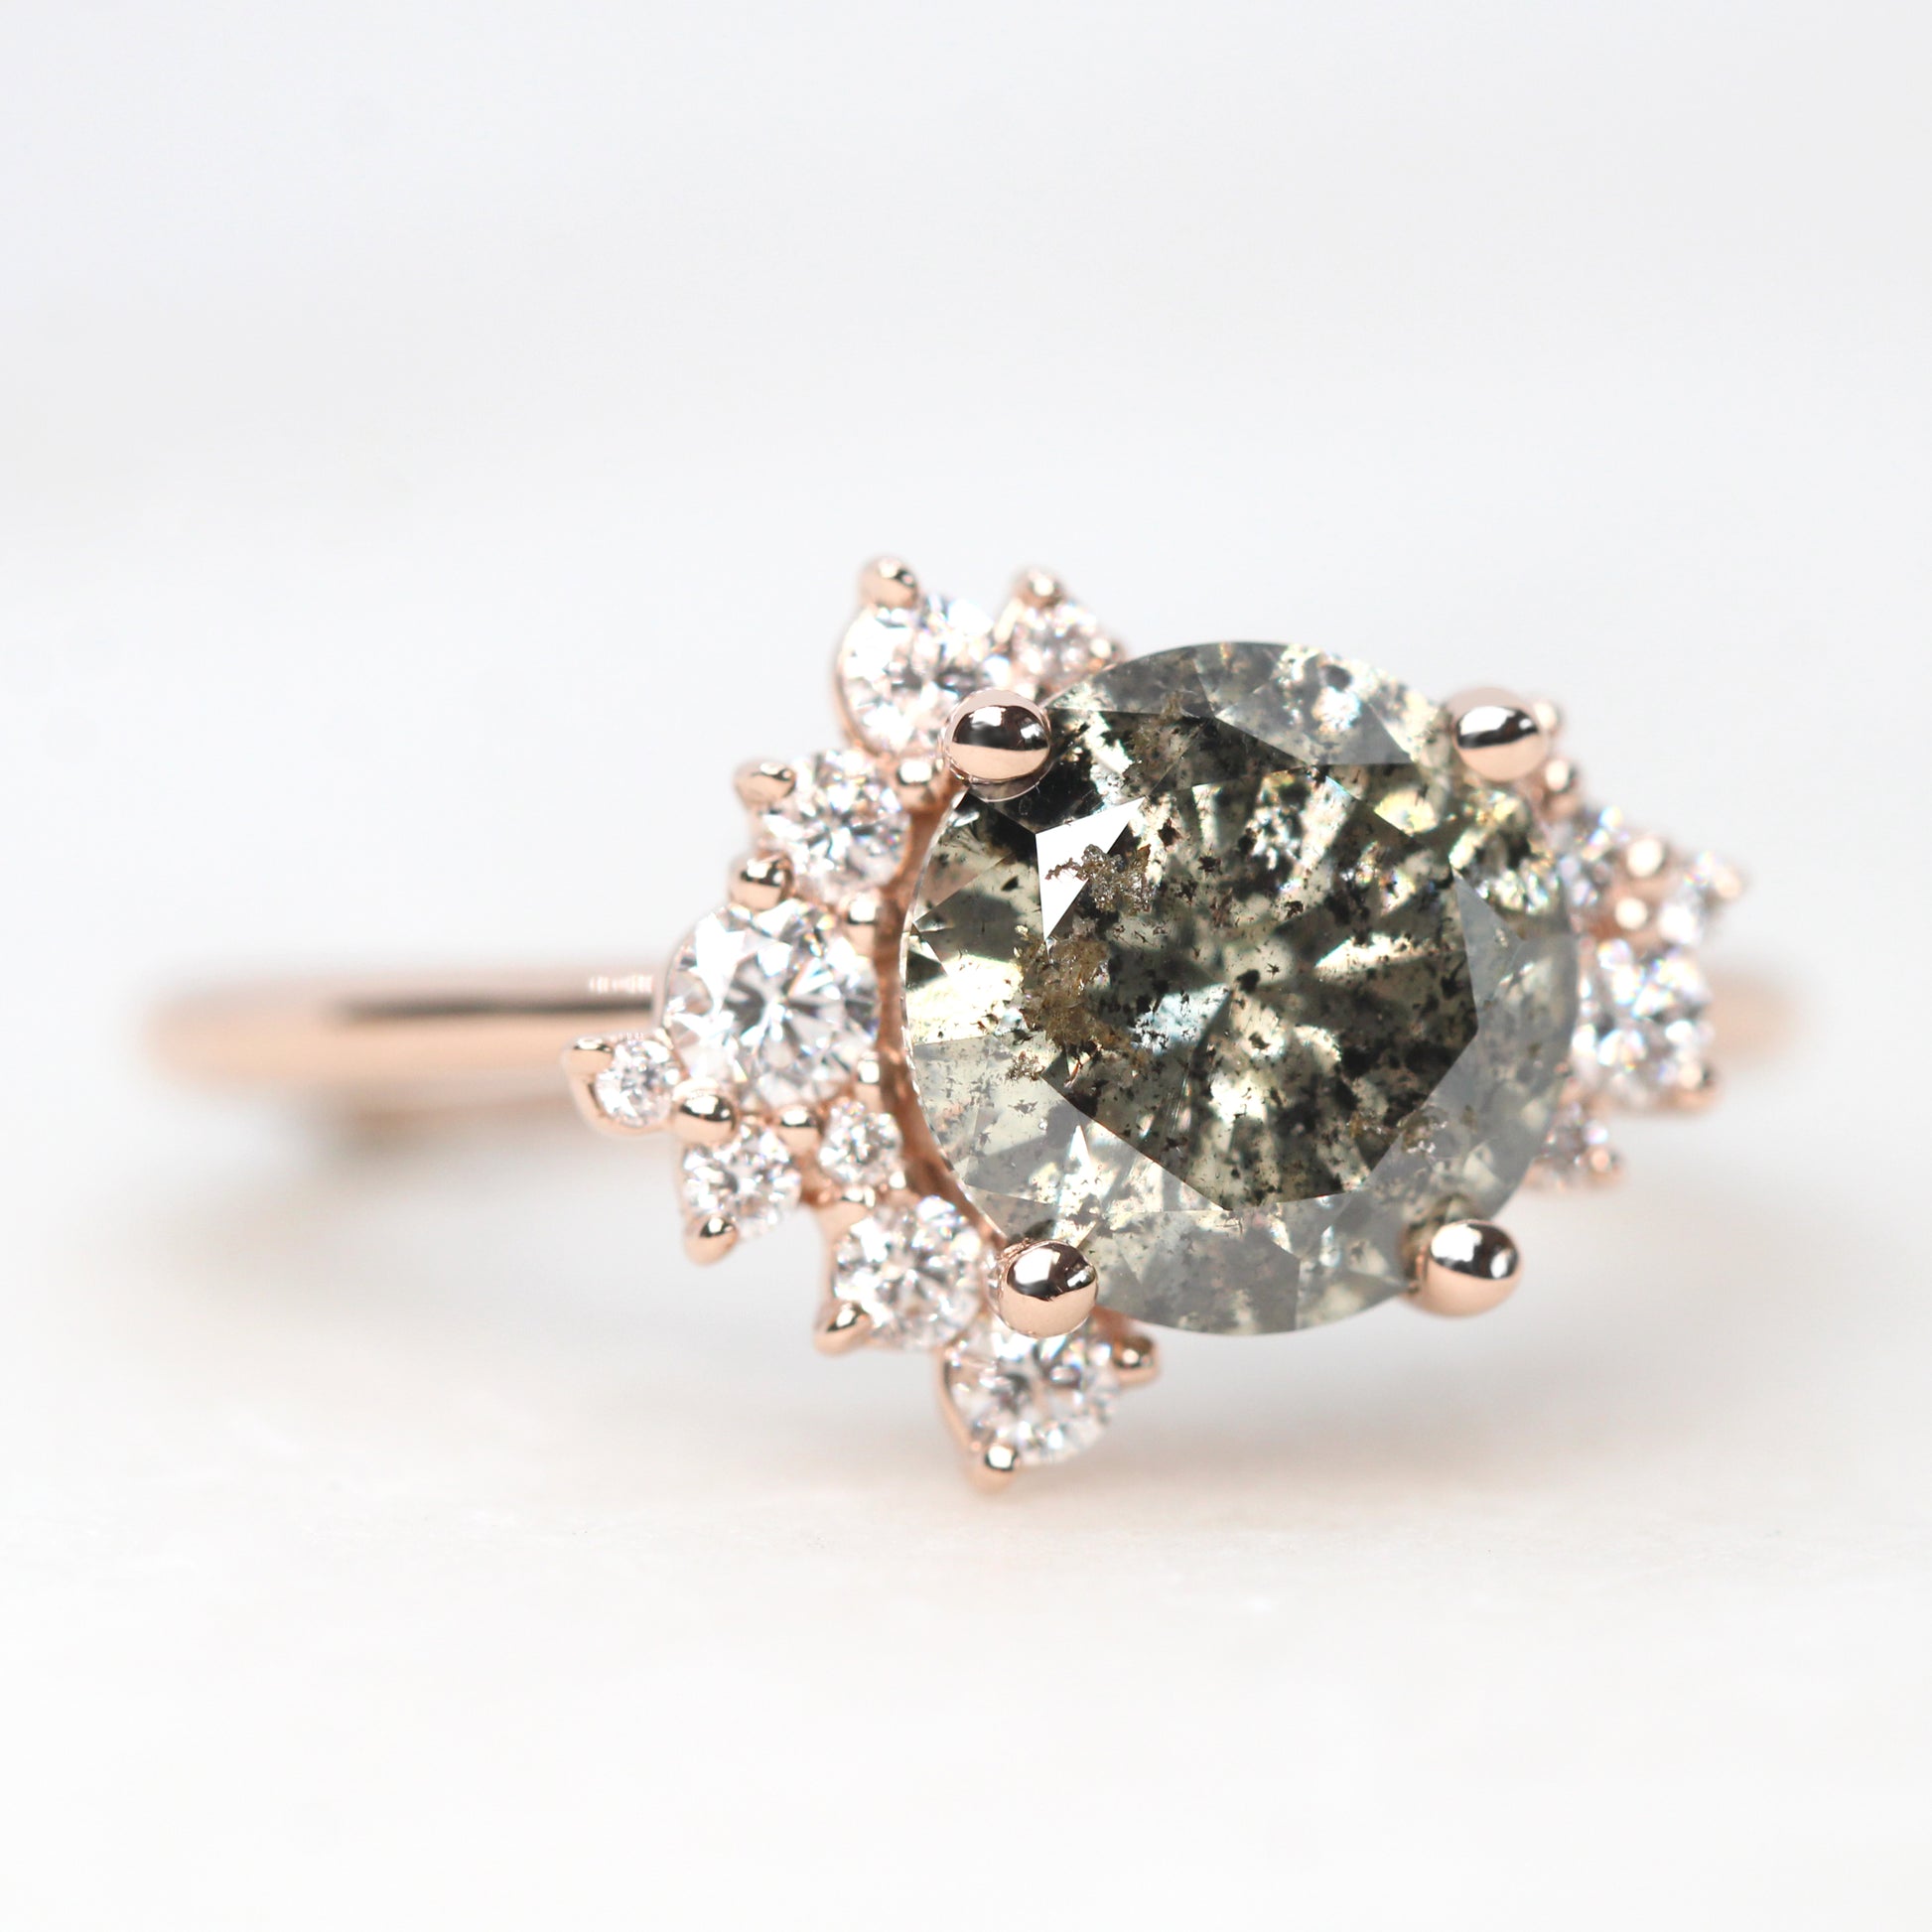 Orion Ring with a 2.08 Carat Round Dark Champagne Salt and Pepper Diamond and White Accent Diamonds in 14k Rose Gold - Ready to Size and Ship - Midwinter Co. Alternative Bridal Rings and Modern Fine Jewelry